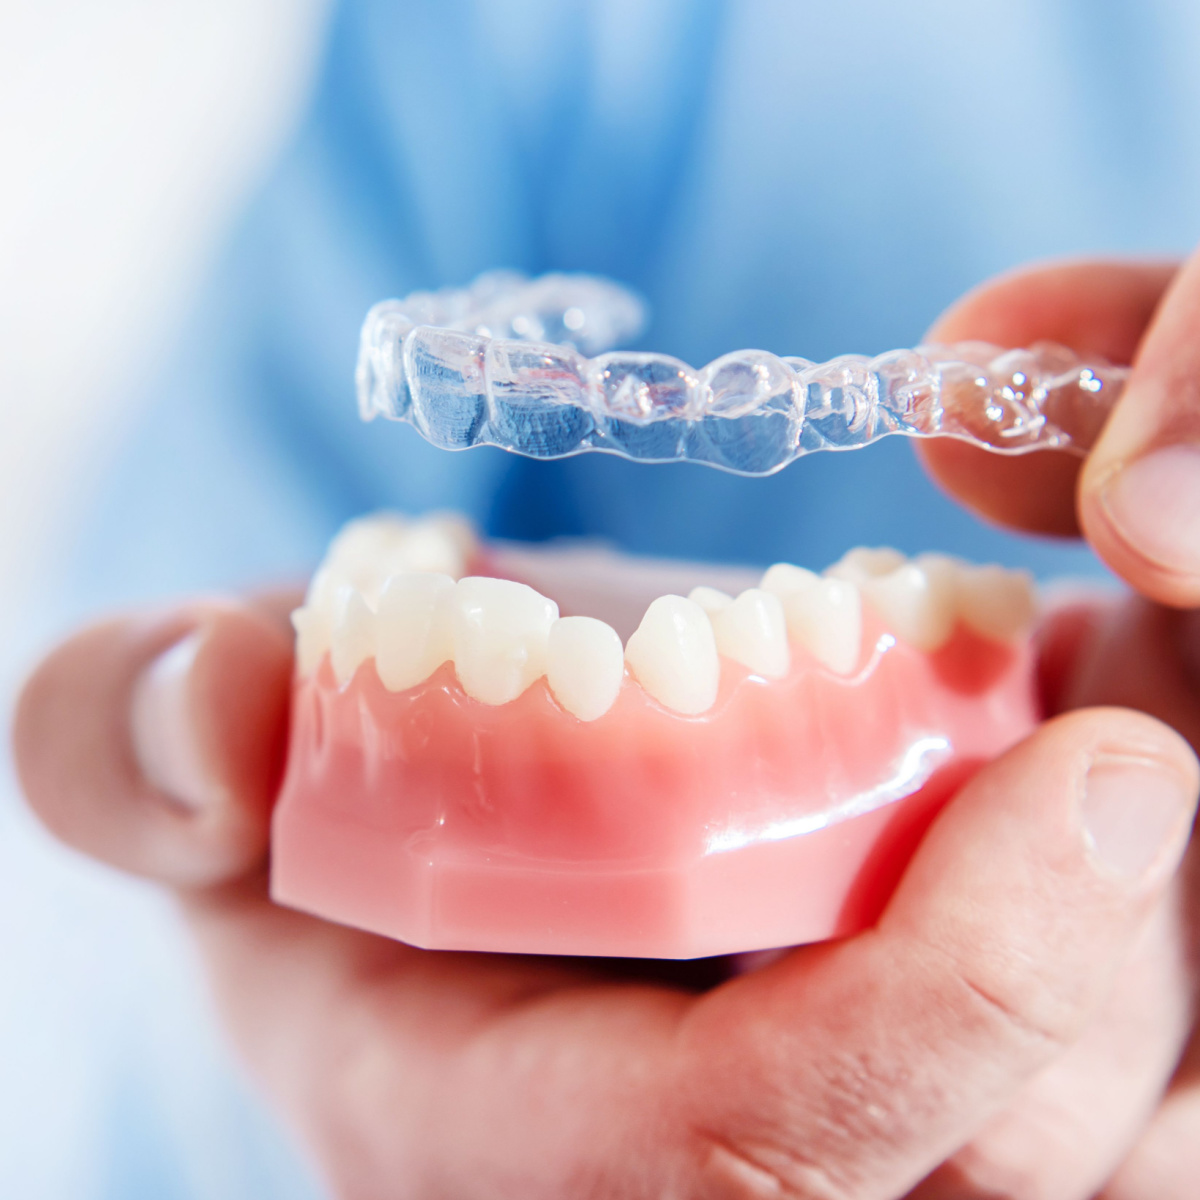 Who Is a Candidate for Houston Invisalign?